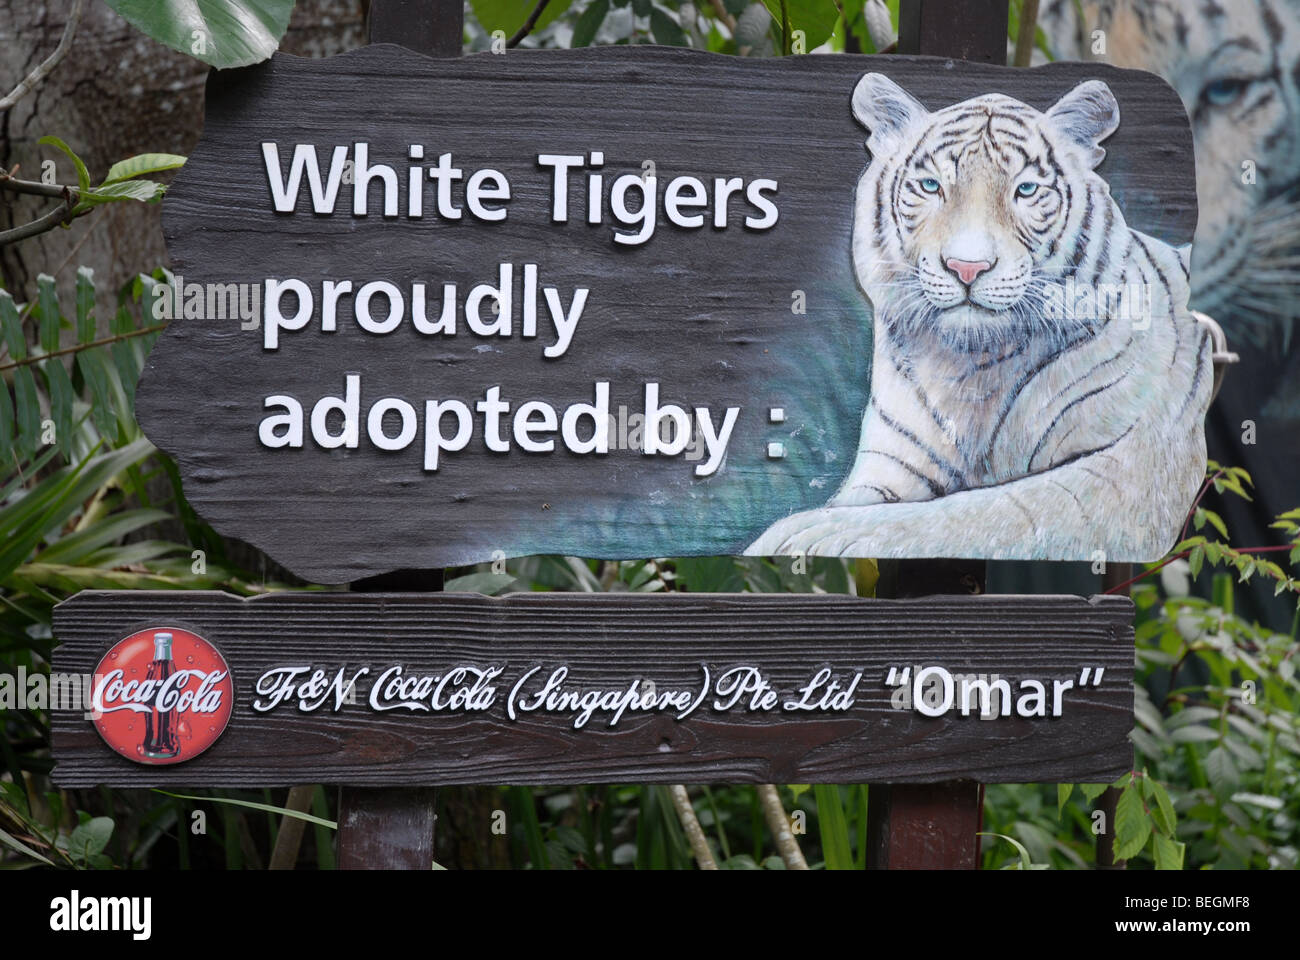 White Tigers Proudly Adopted by F&N Coca-Cola